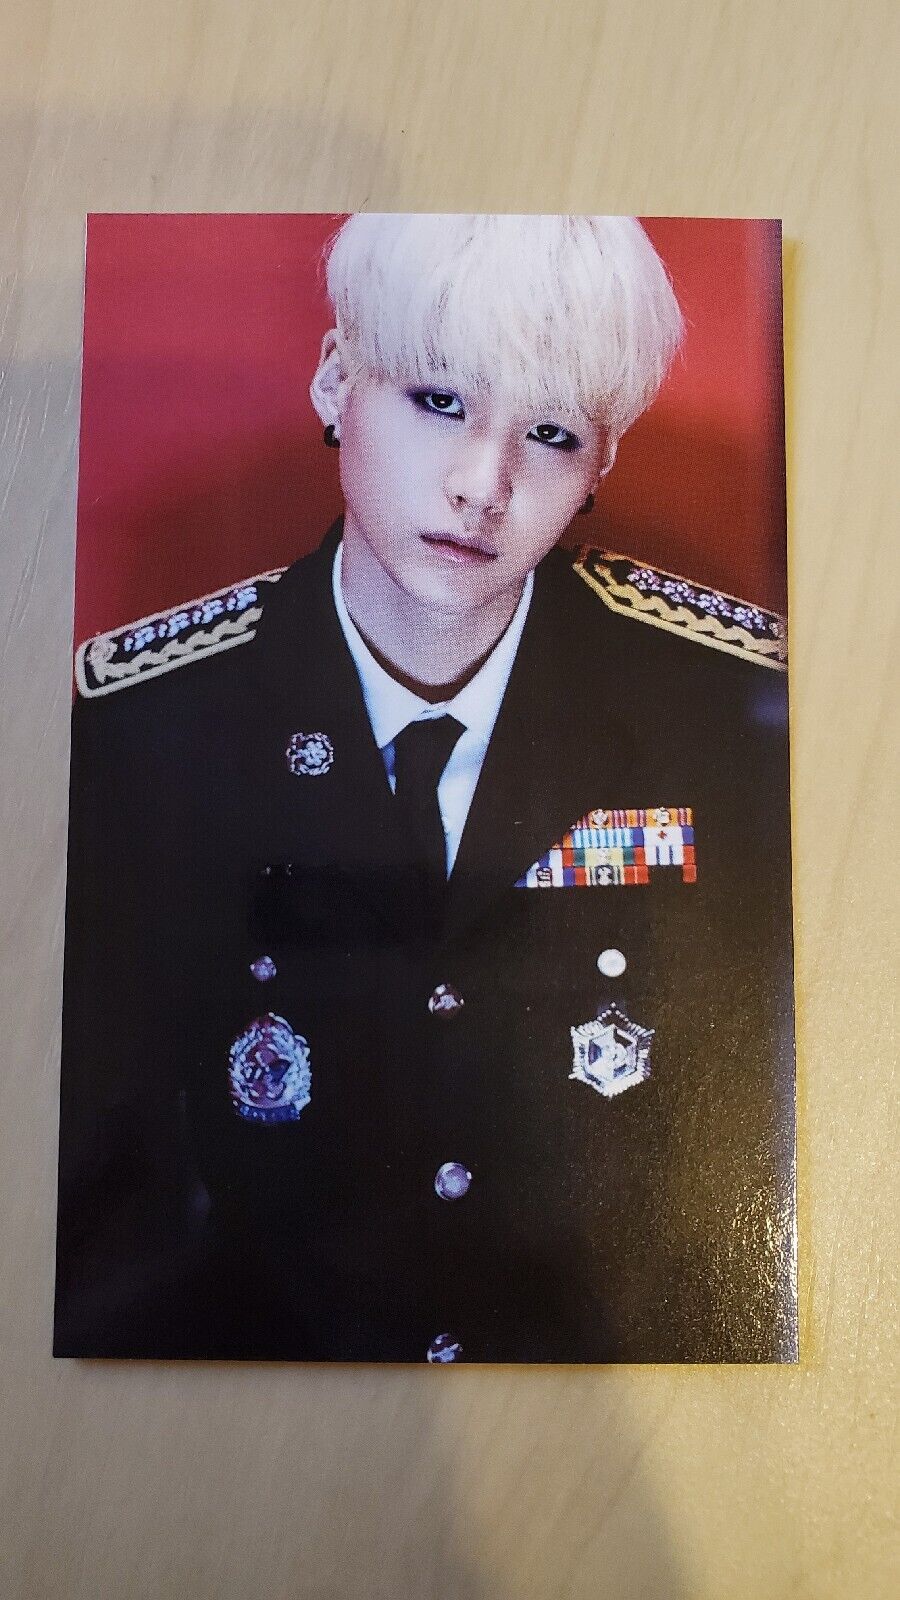 BTS Suga Young Forever PHOTCARD official limited and rare 1st press only